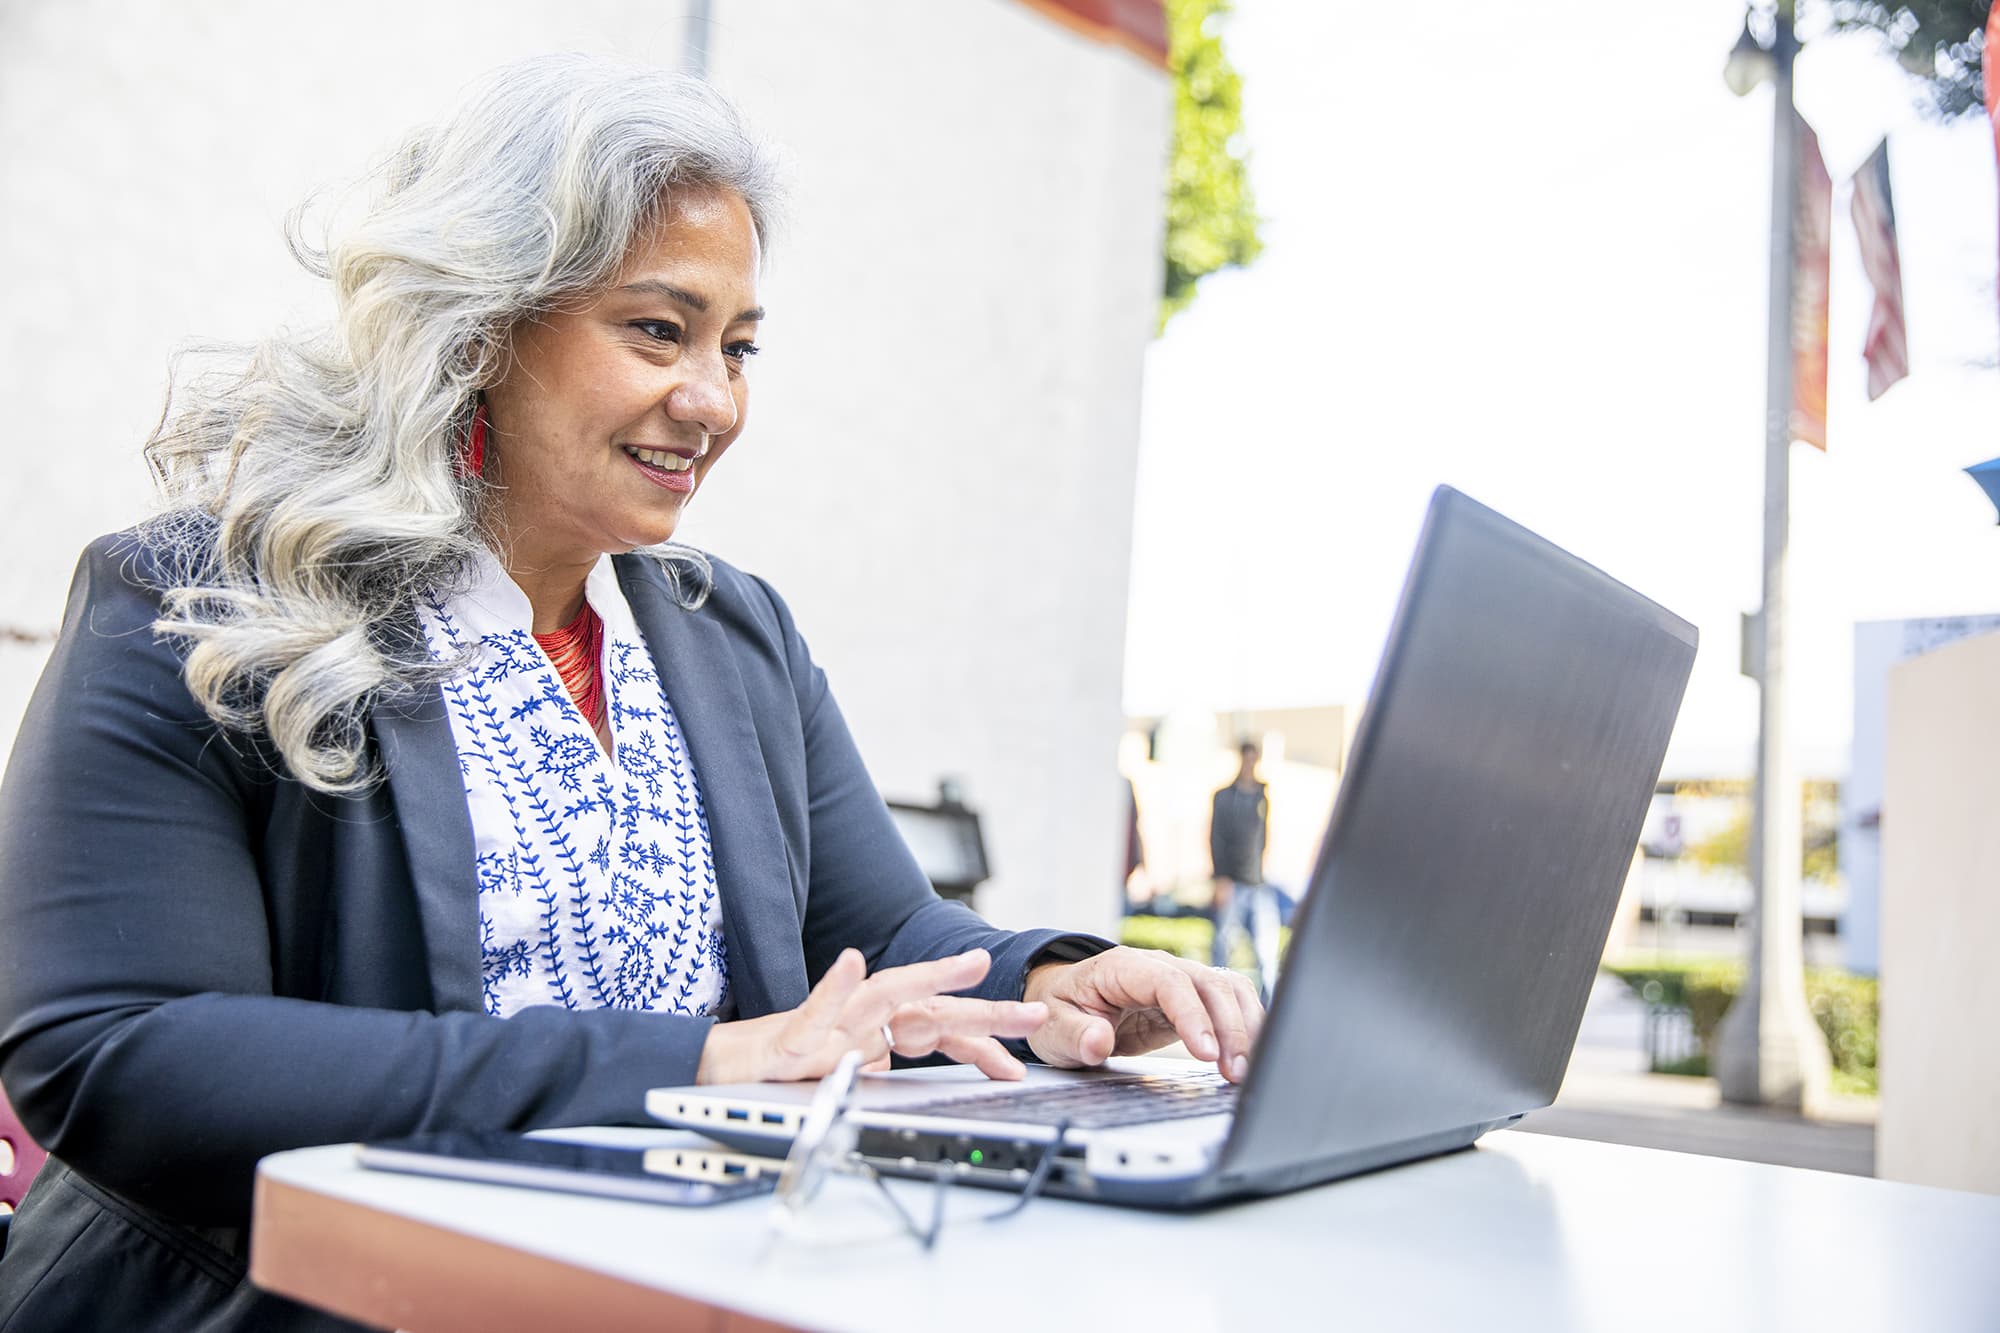 Woman smiling as she works on laptop